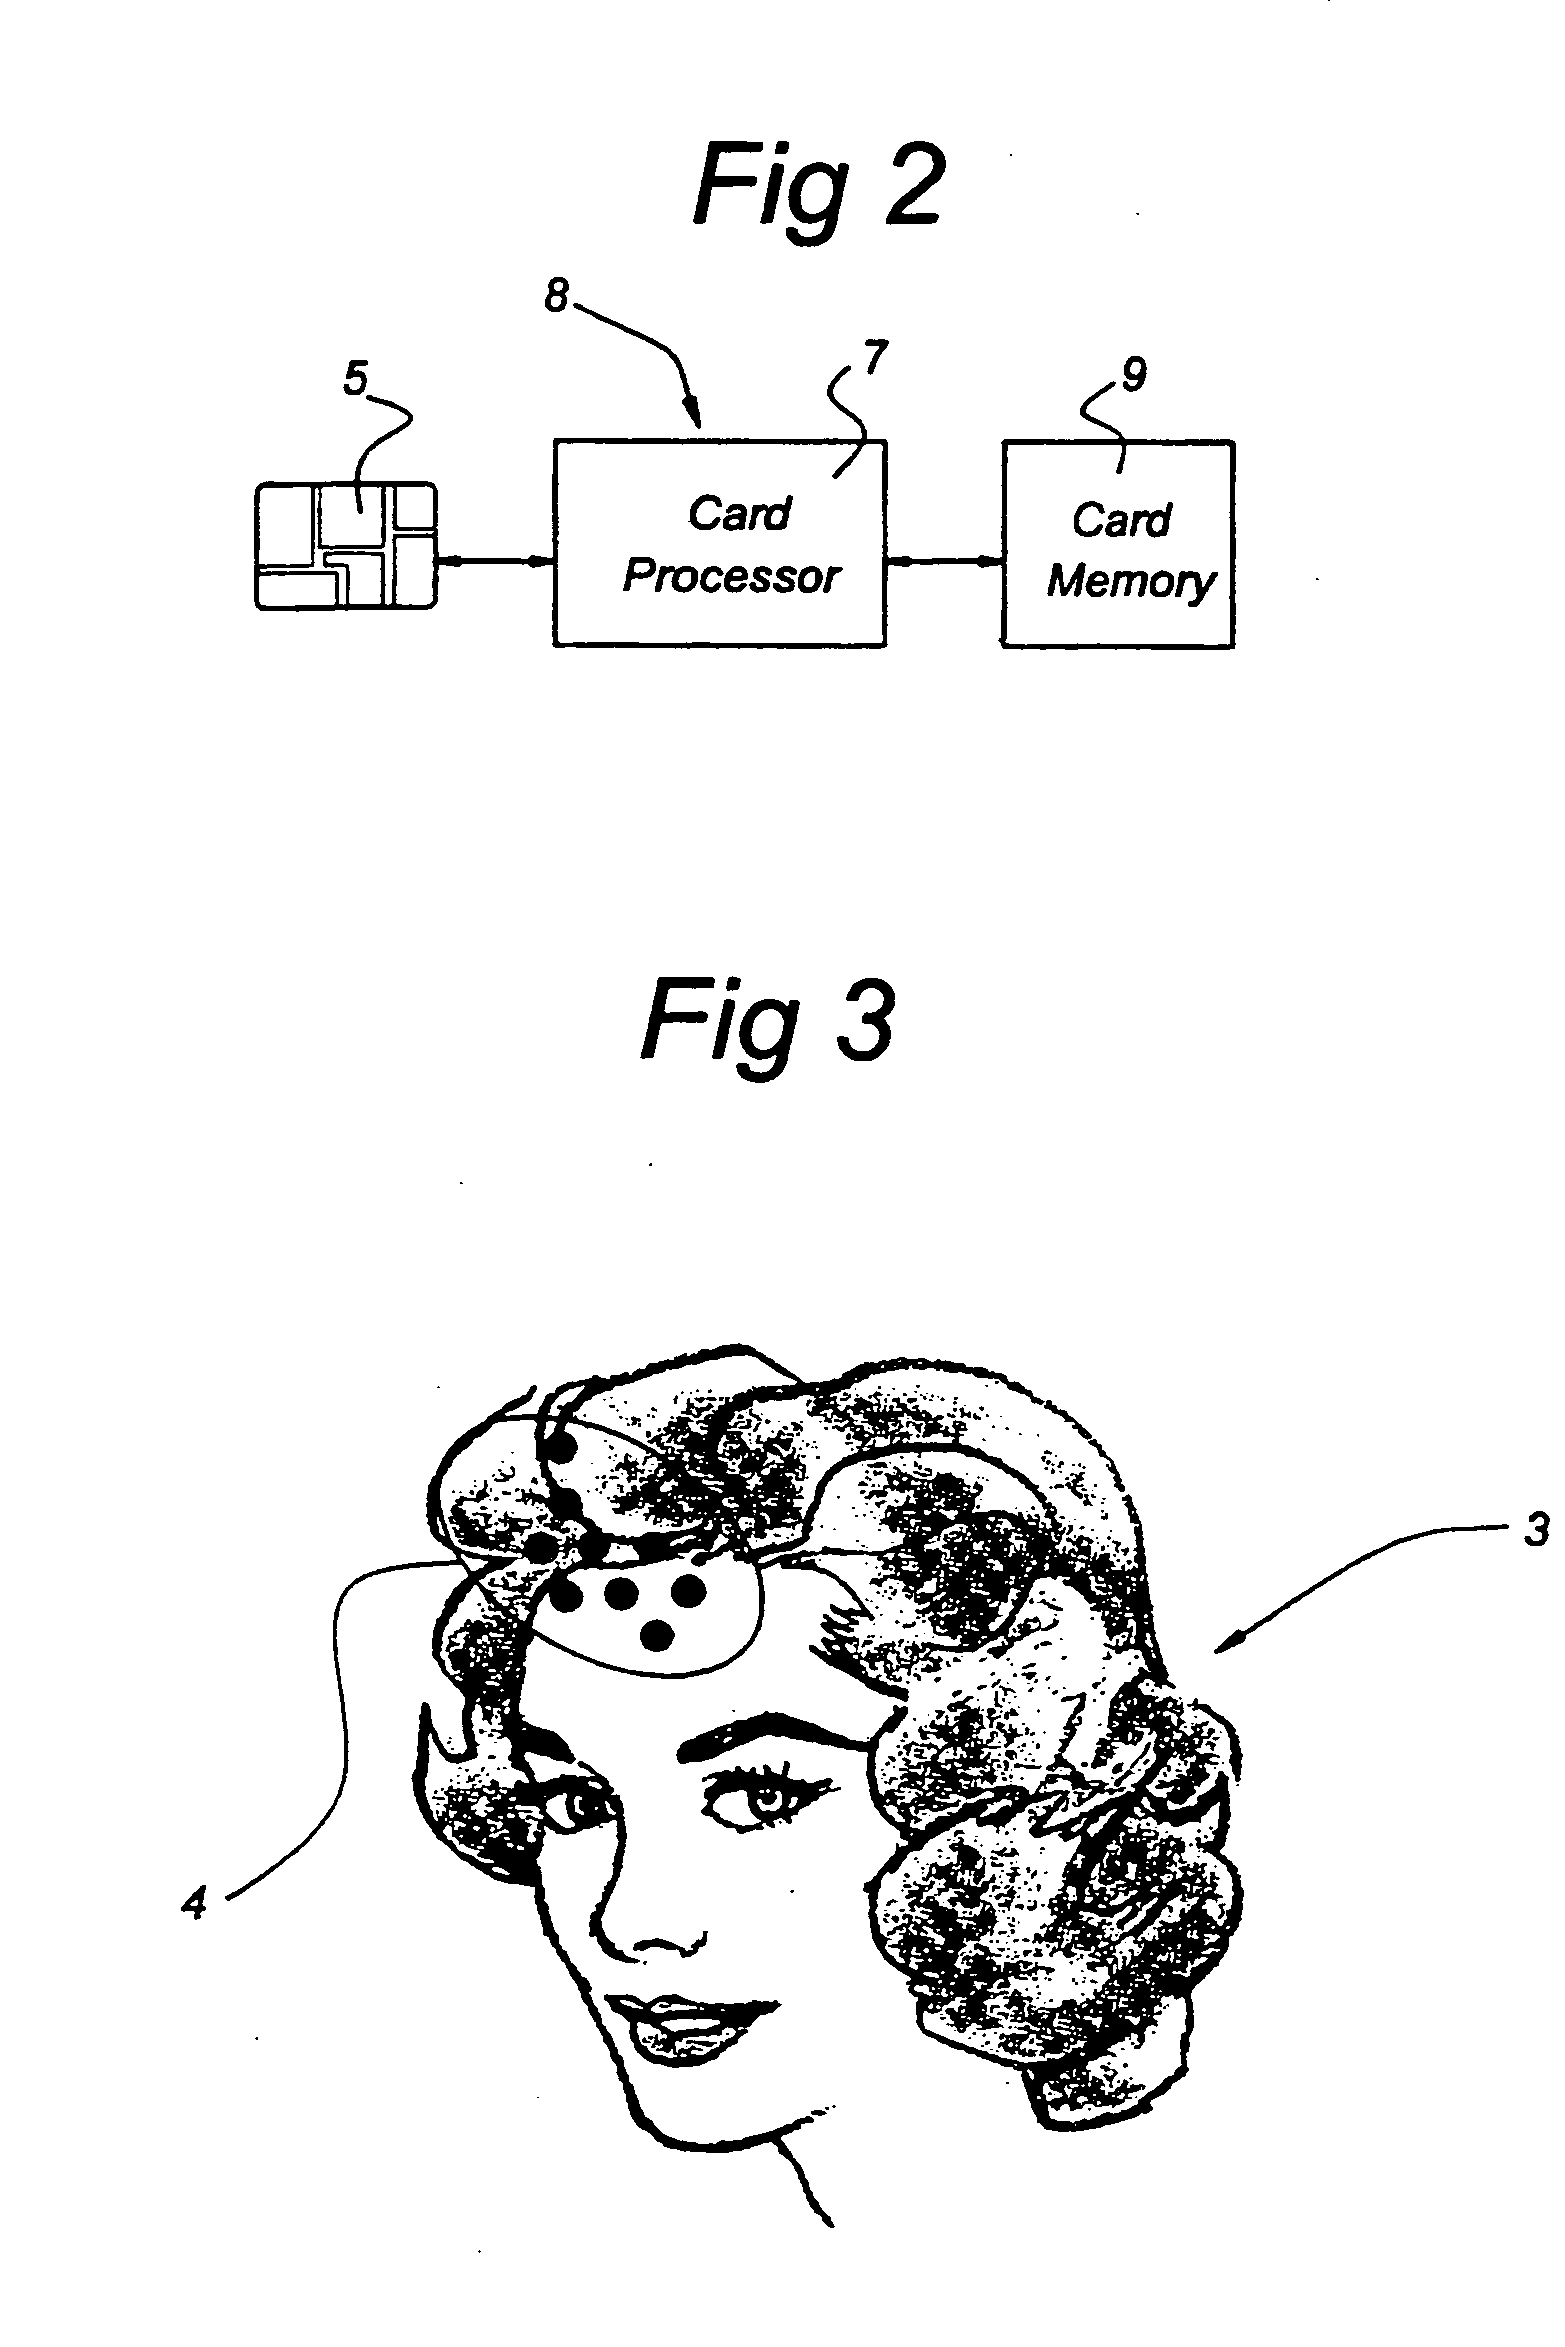 Secure photo carrying identification device, as well as means and method for authenticating such an identification device